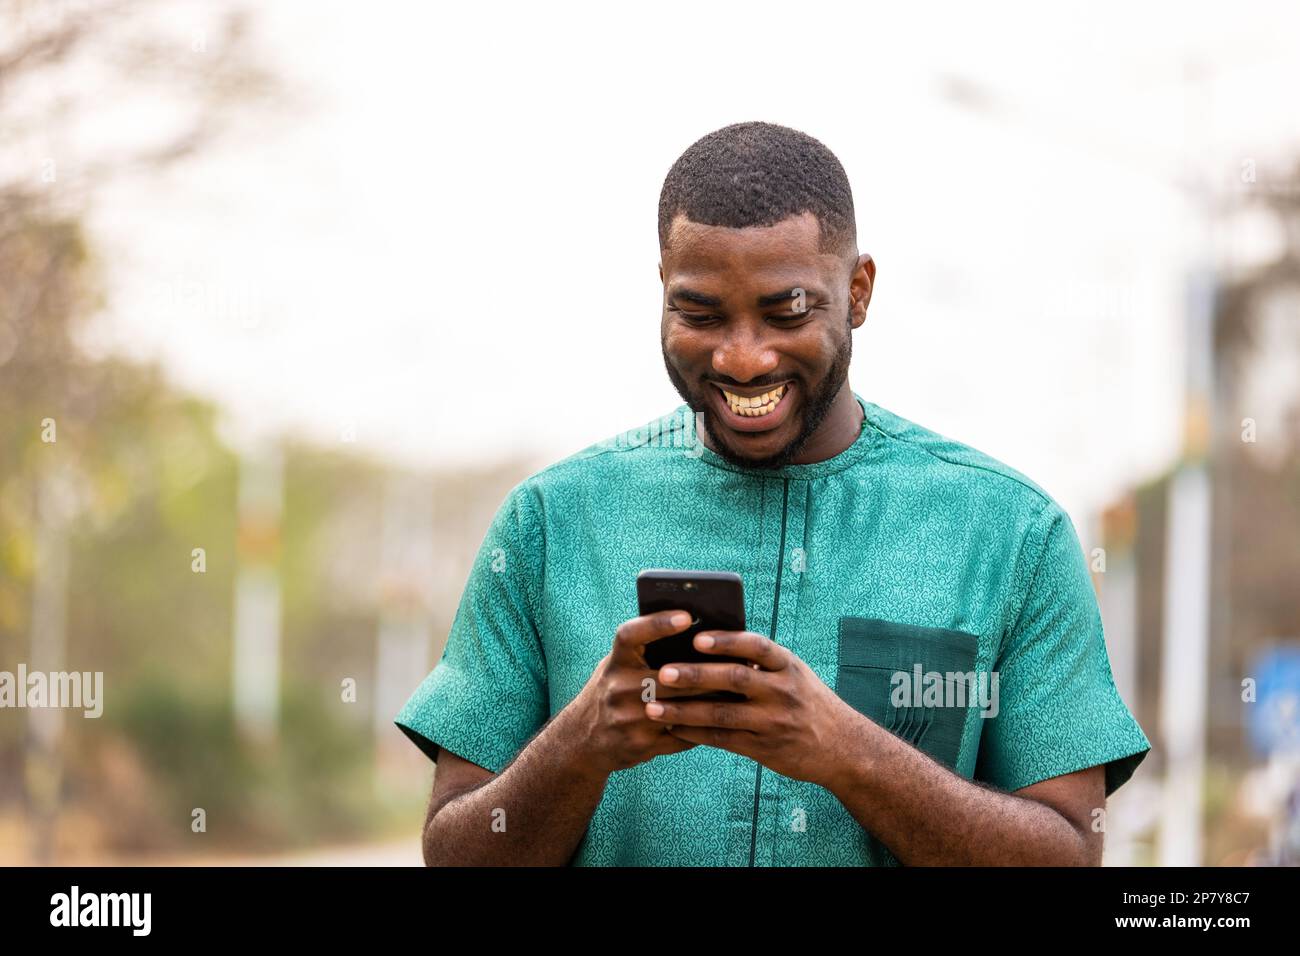 Young African Man Mobile banking on-the-go with smartphone, Portrait of Ghanaian man holding cellphone Stock Photo